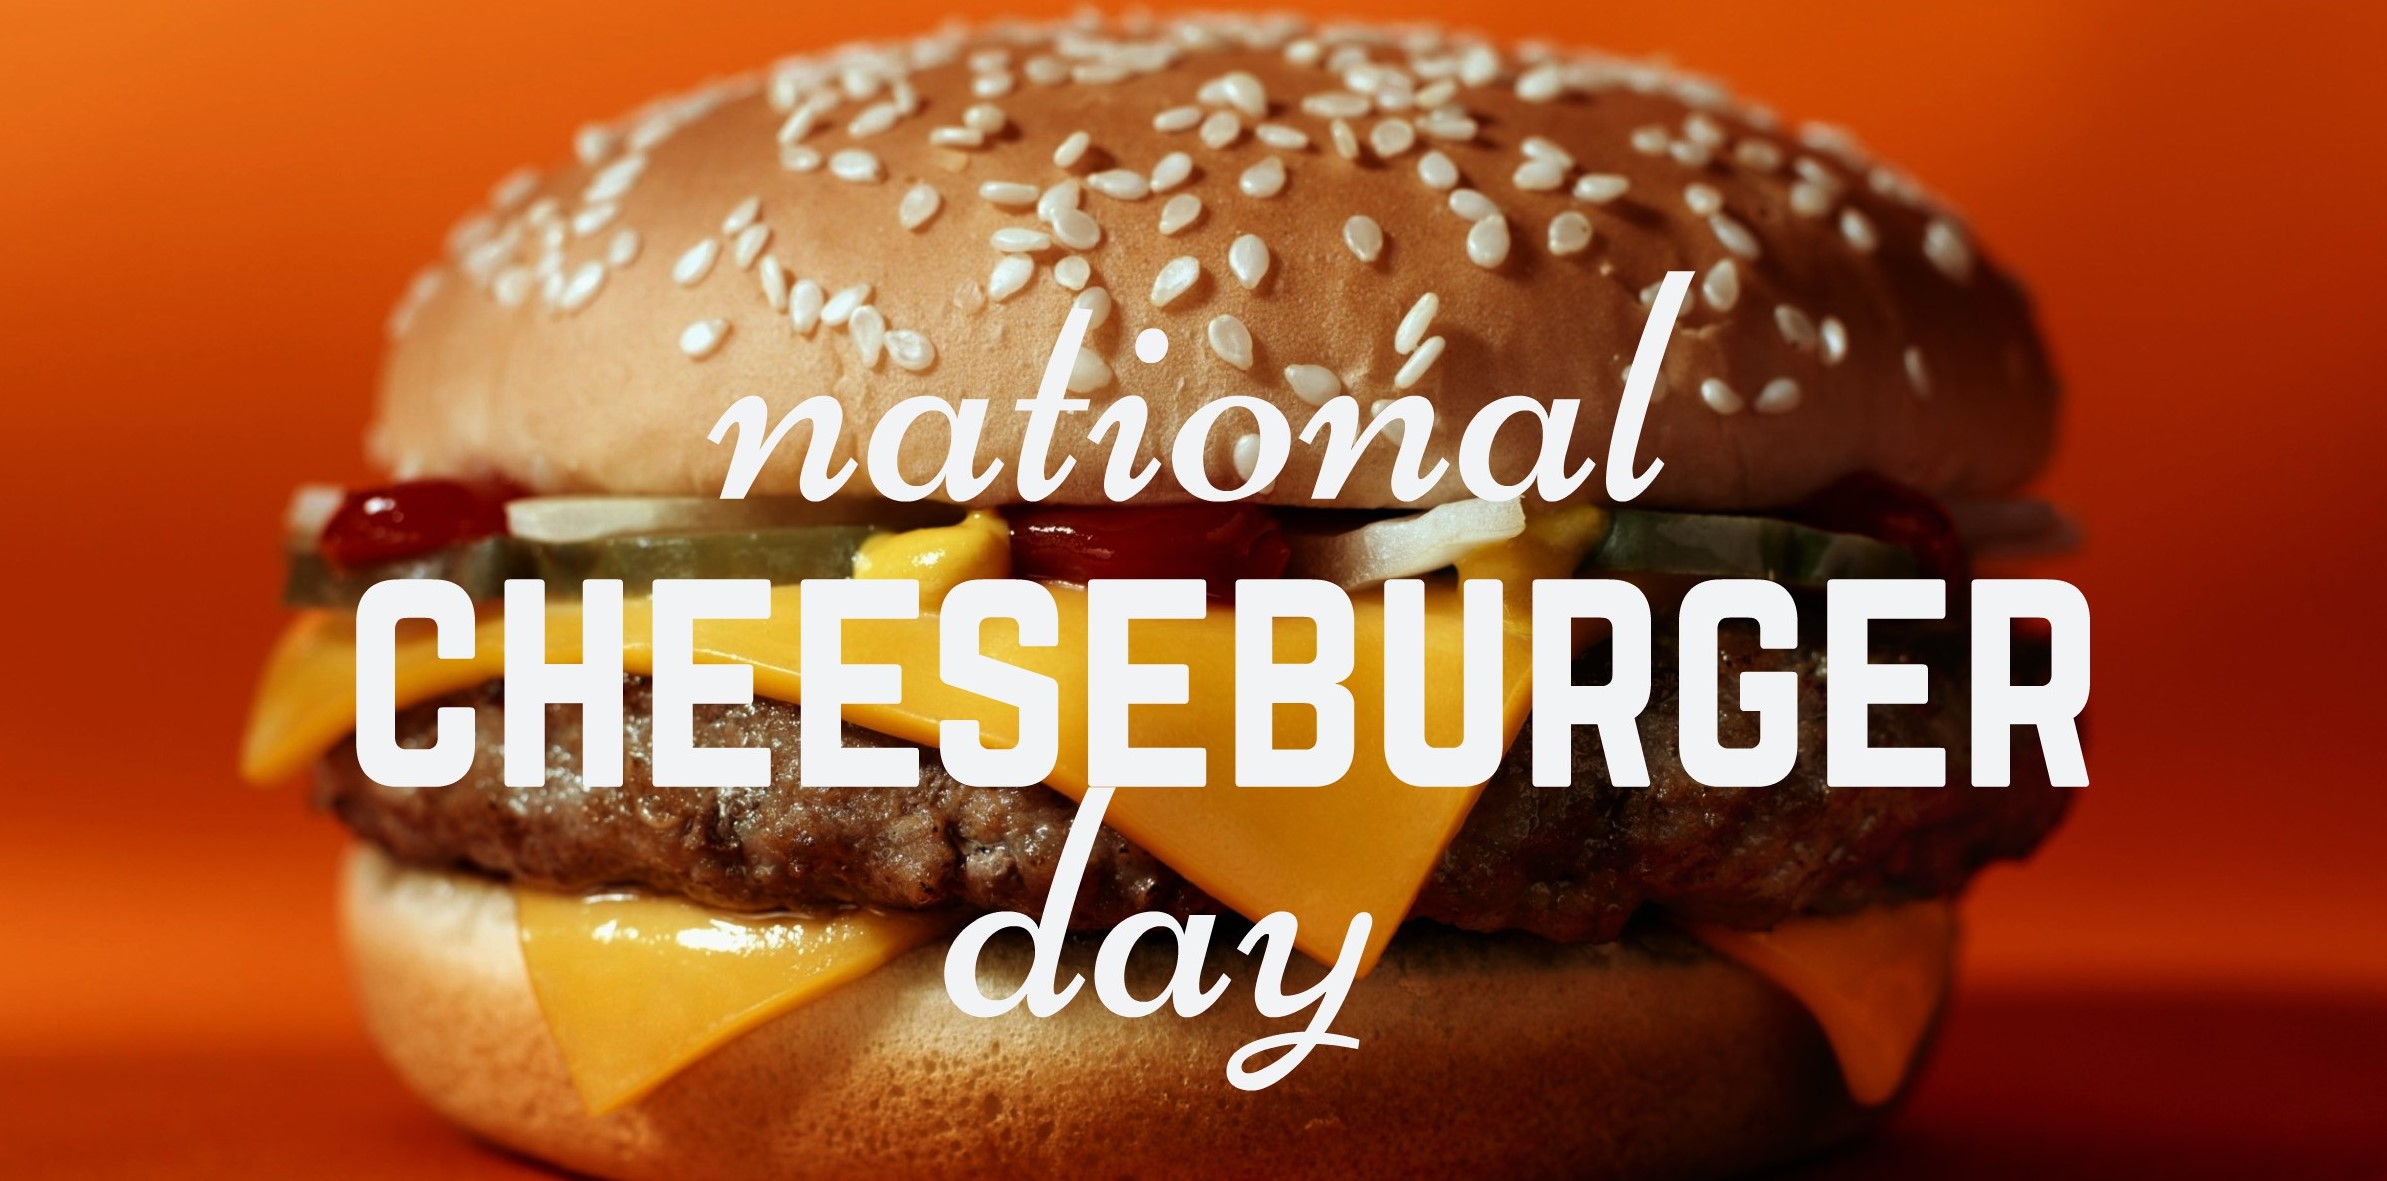 10-facts-about-national-cheeseburger-day